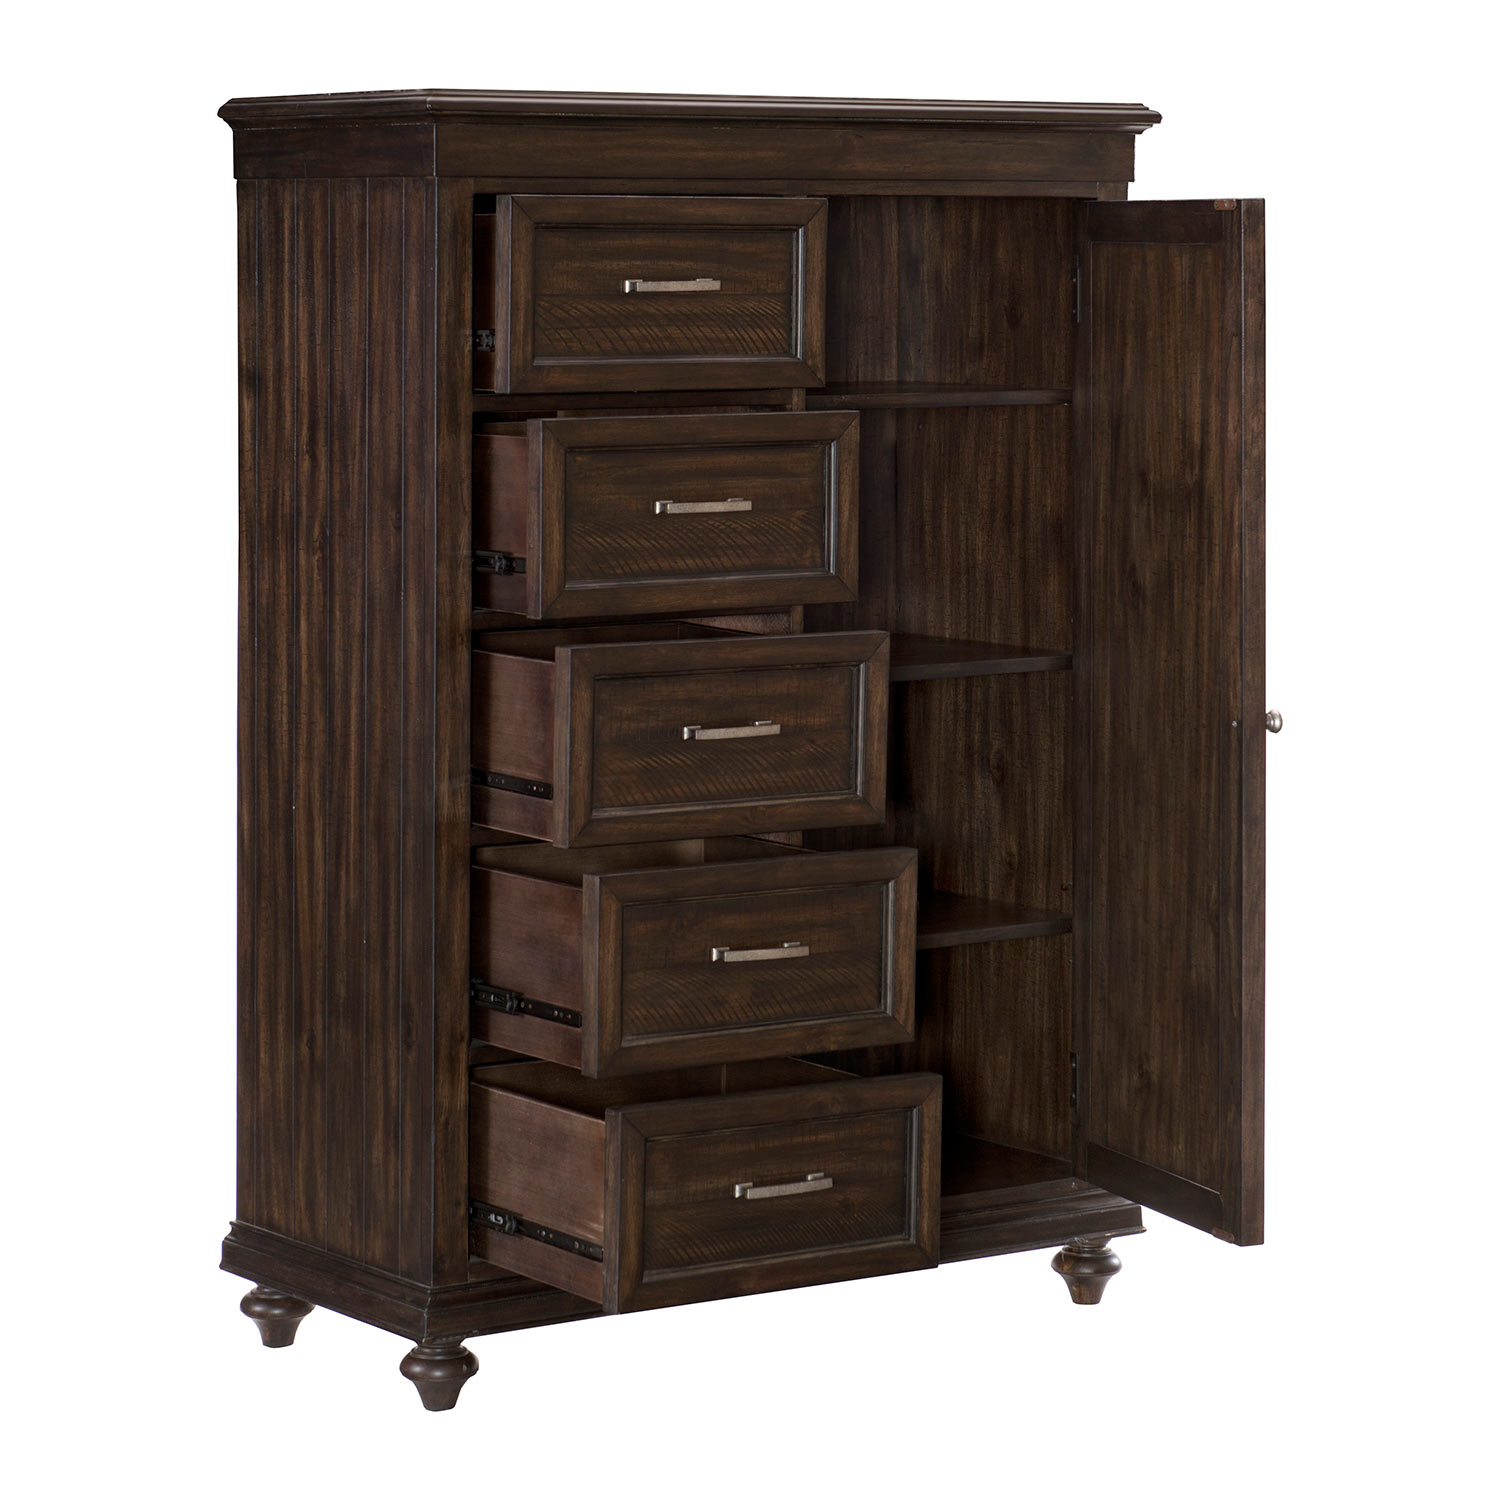 Homelegance Cardano Wardrobe Chest - Driftwood Charcoal over Acacia Solids and Veneers